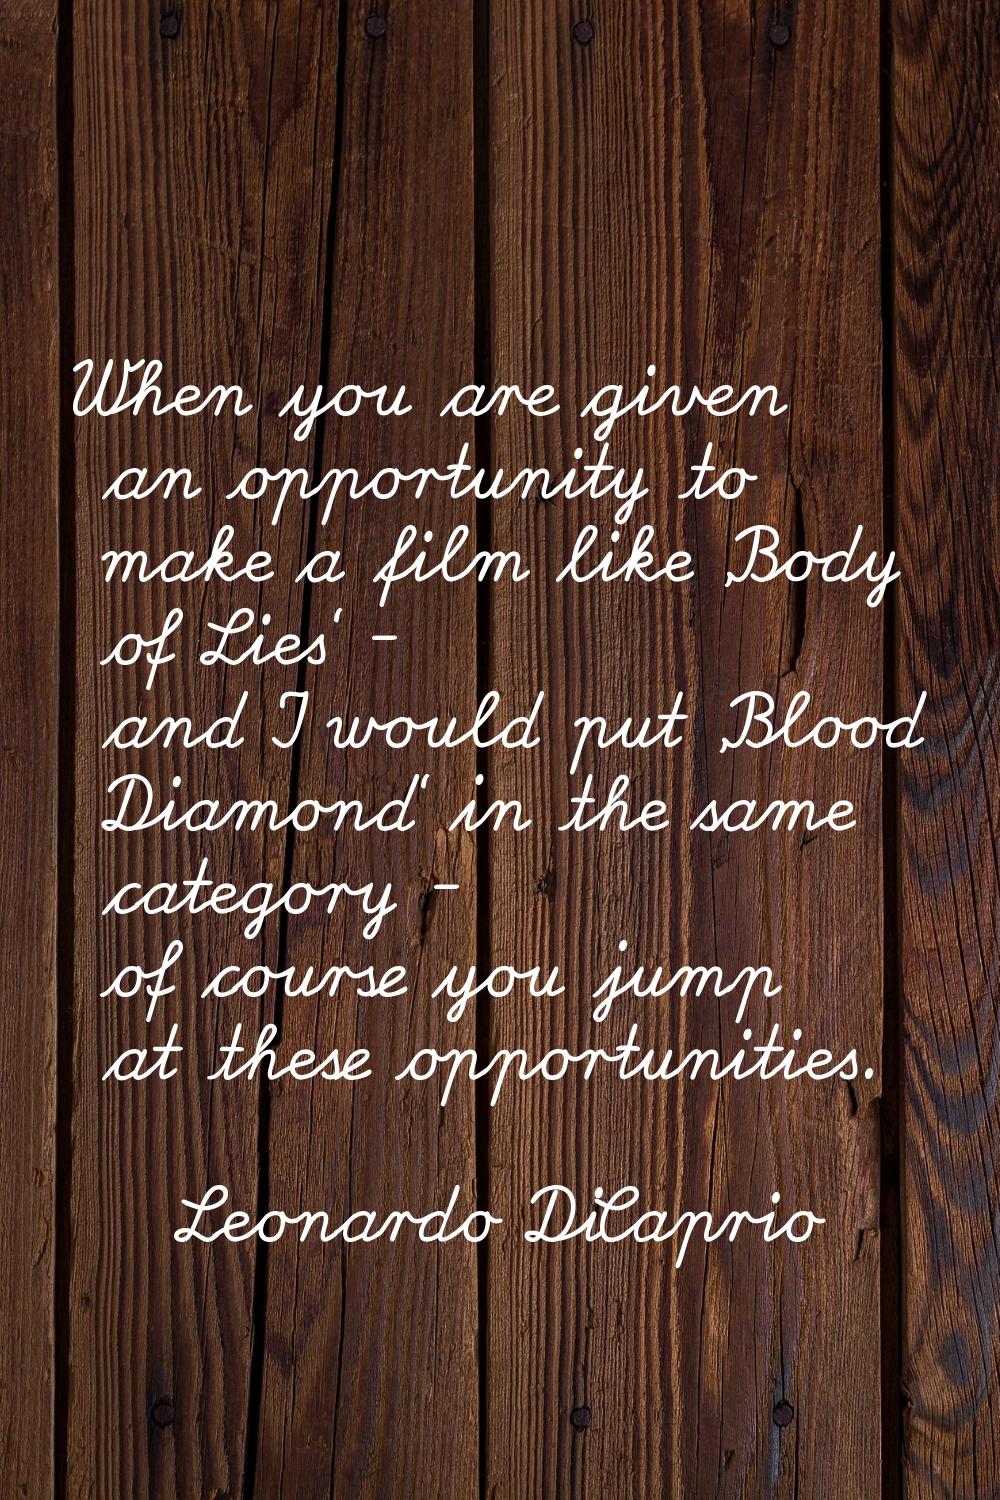 When you are given an opportunity to make a film like 'Body of Lies' - and I would put 'Blood Diamo